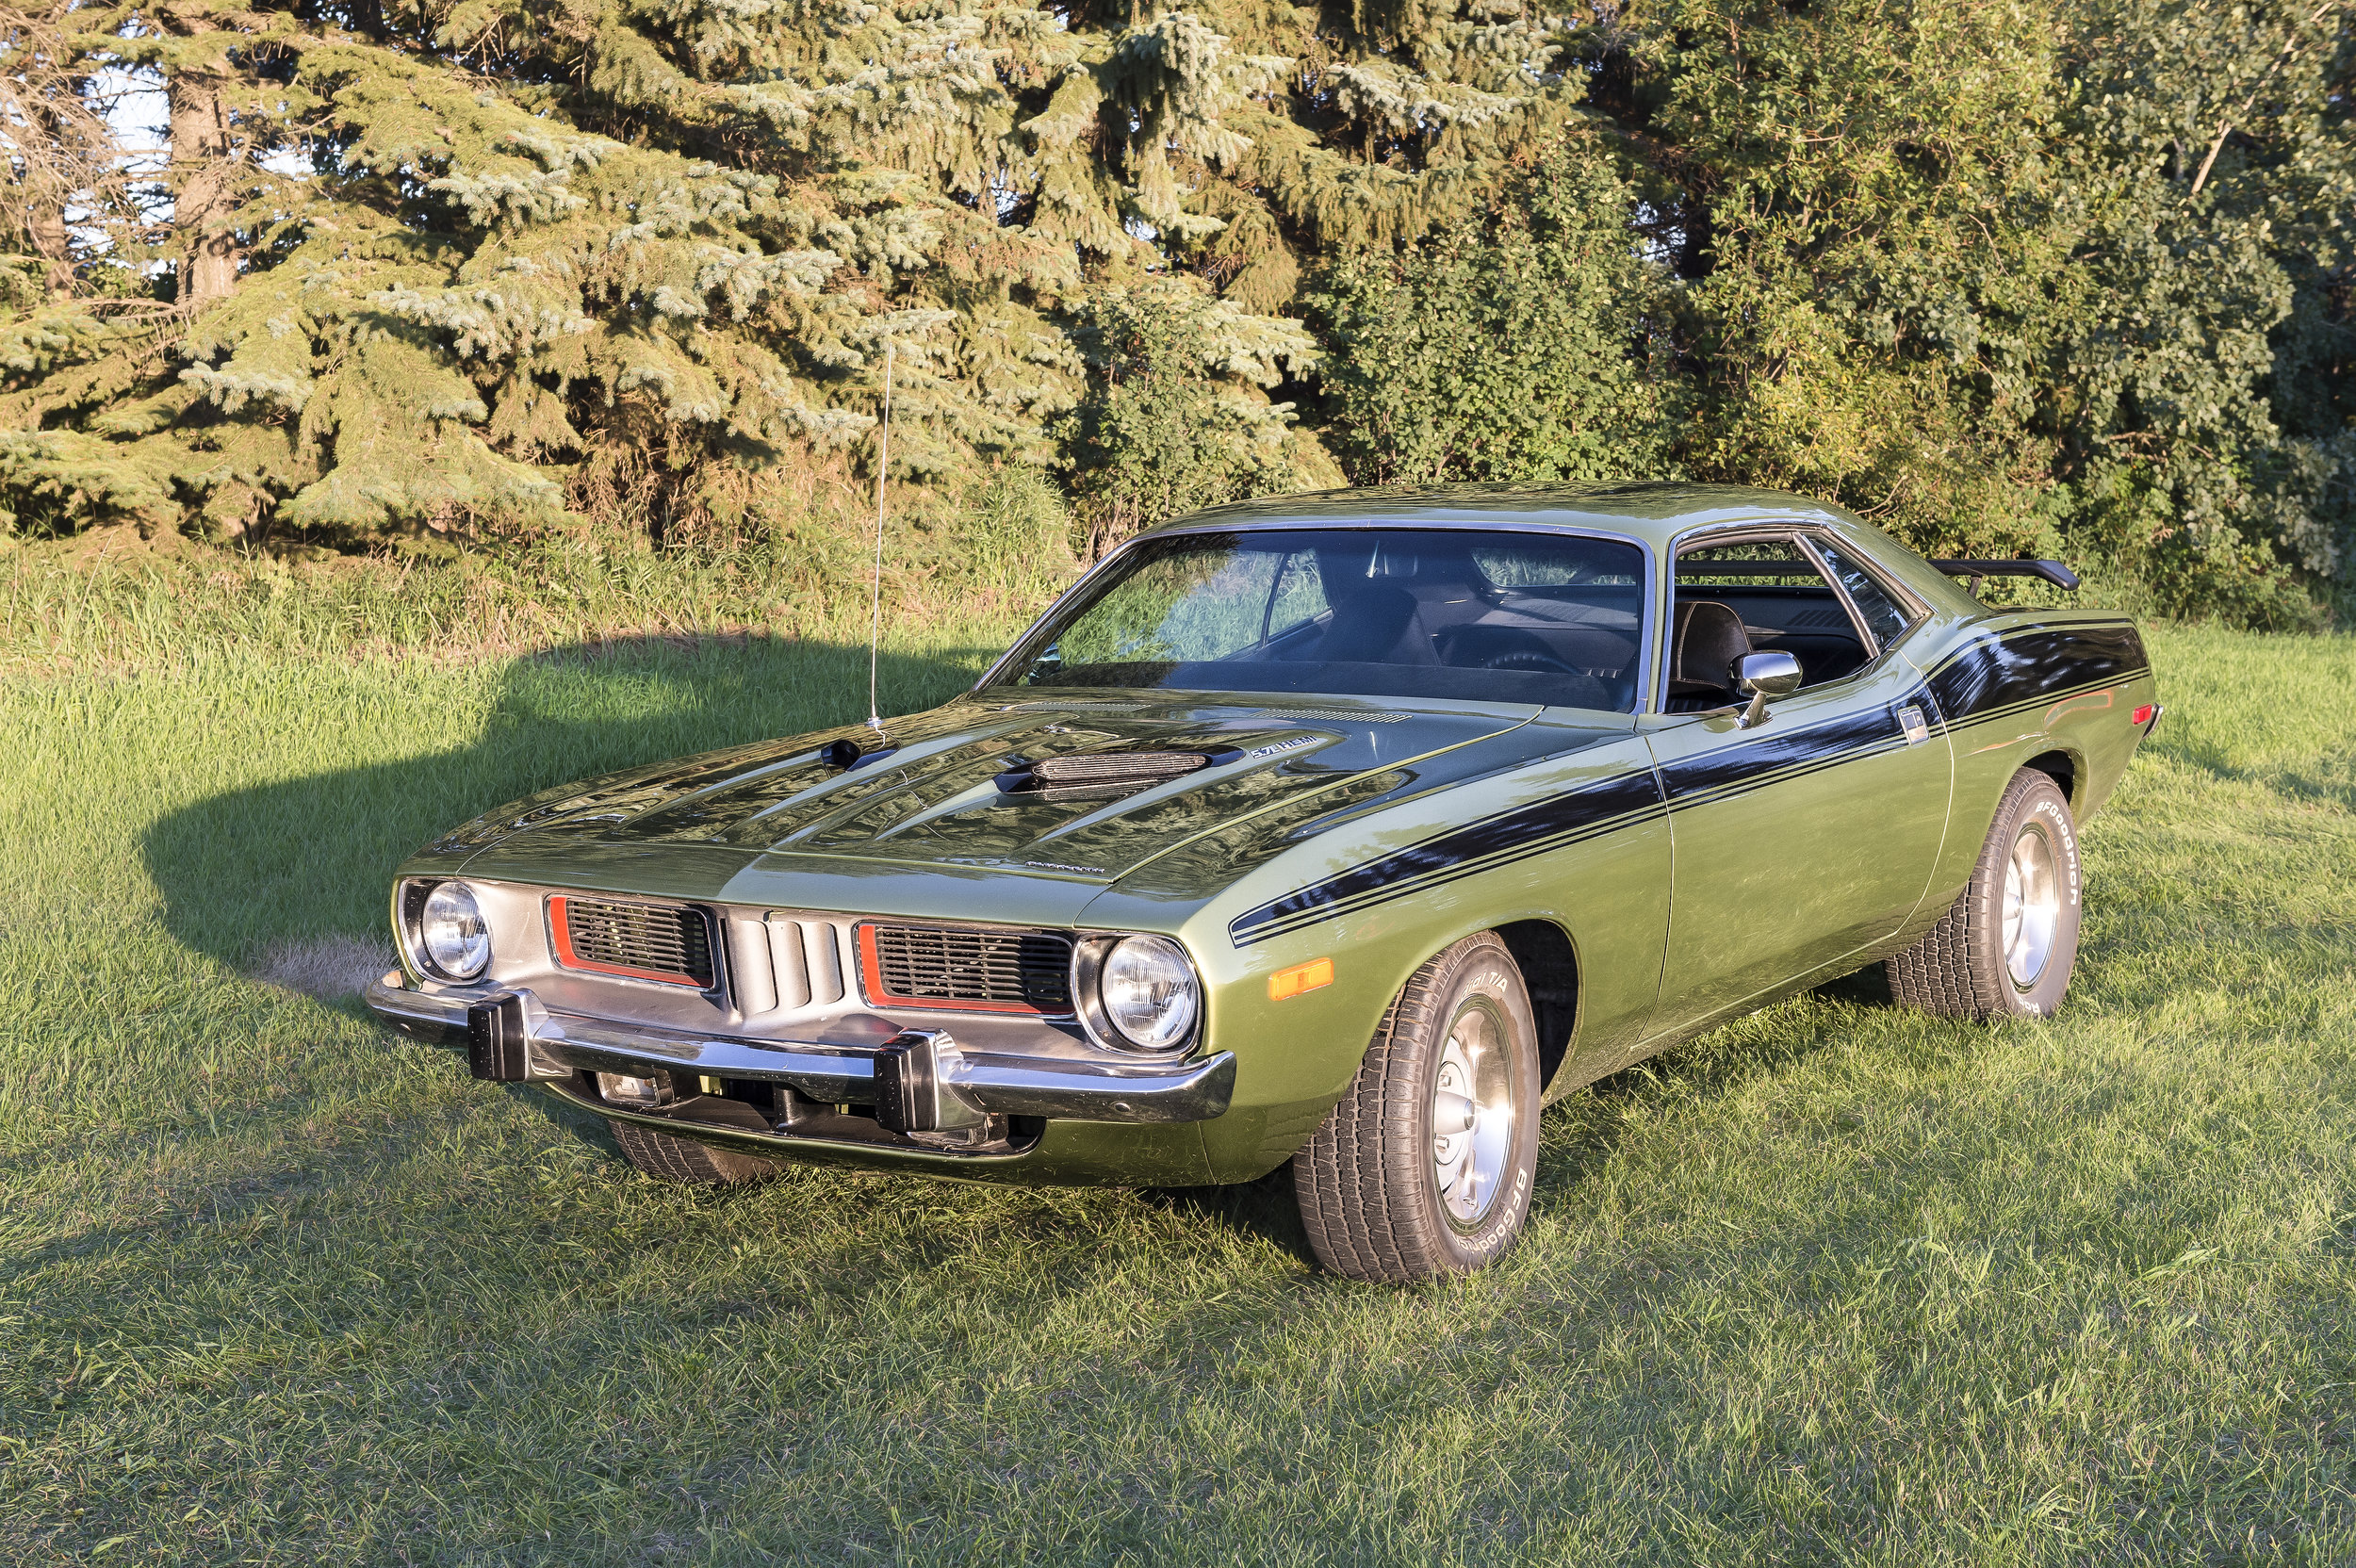   1973 Plymouth Barracuda   5.7 Hemi Engine and a 727 Automatic transmission and 8-3/4” Rear Diff. This car is locally owned and driven. You can see it and more at Just Kruzin Kruz nights 